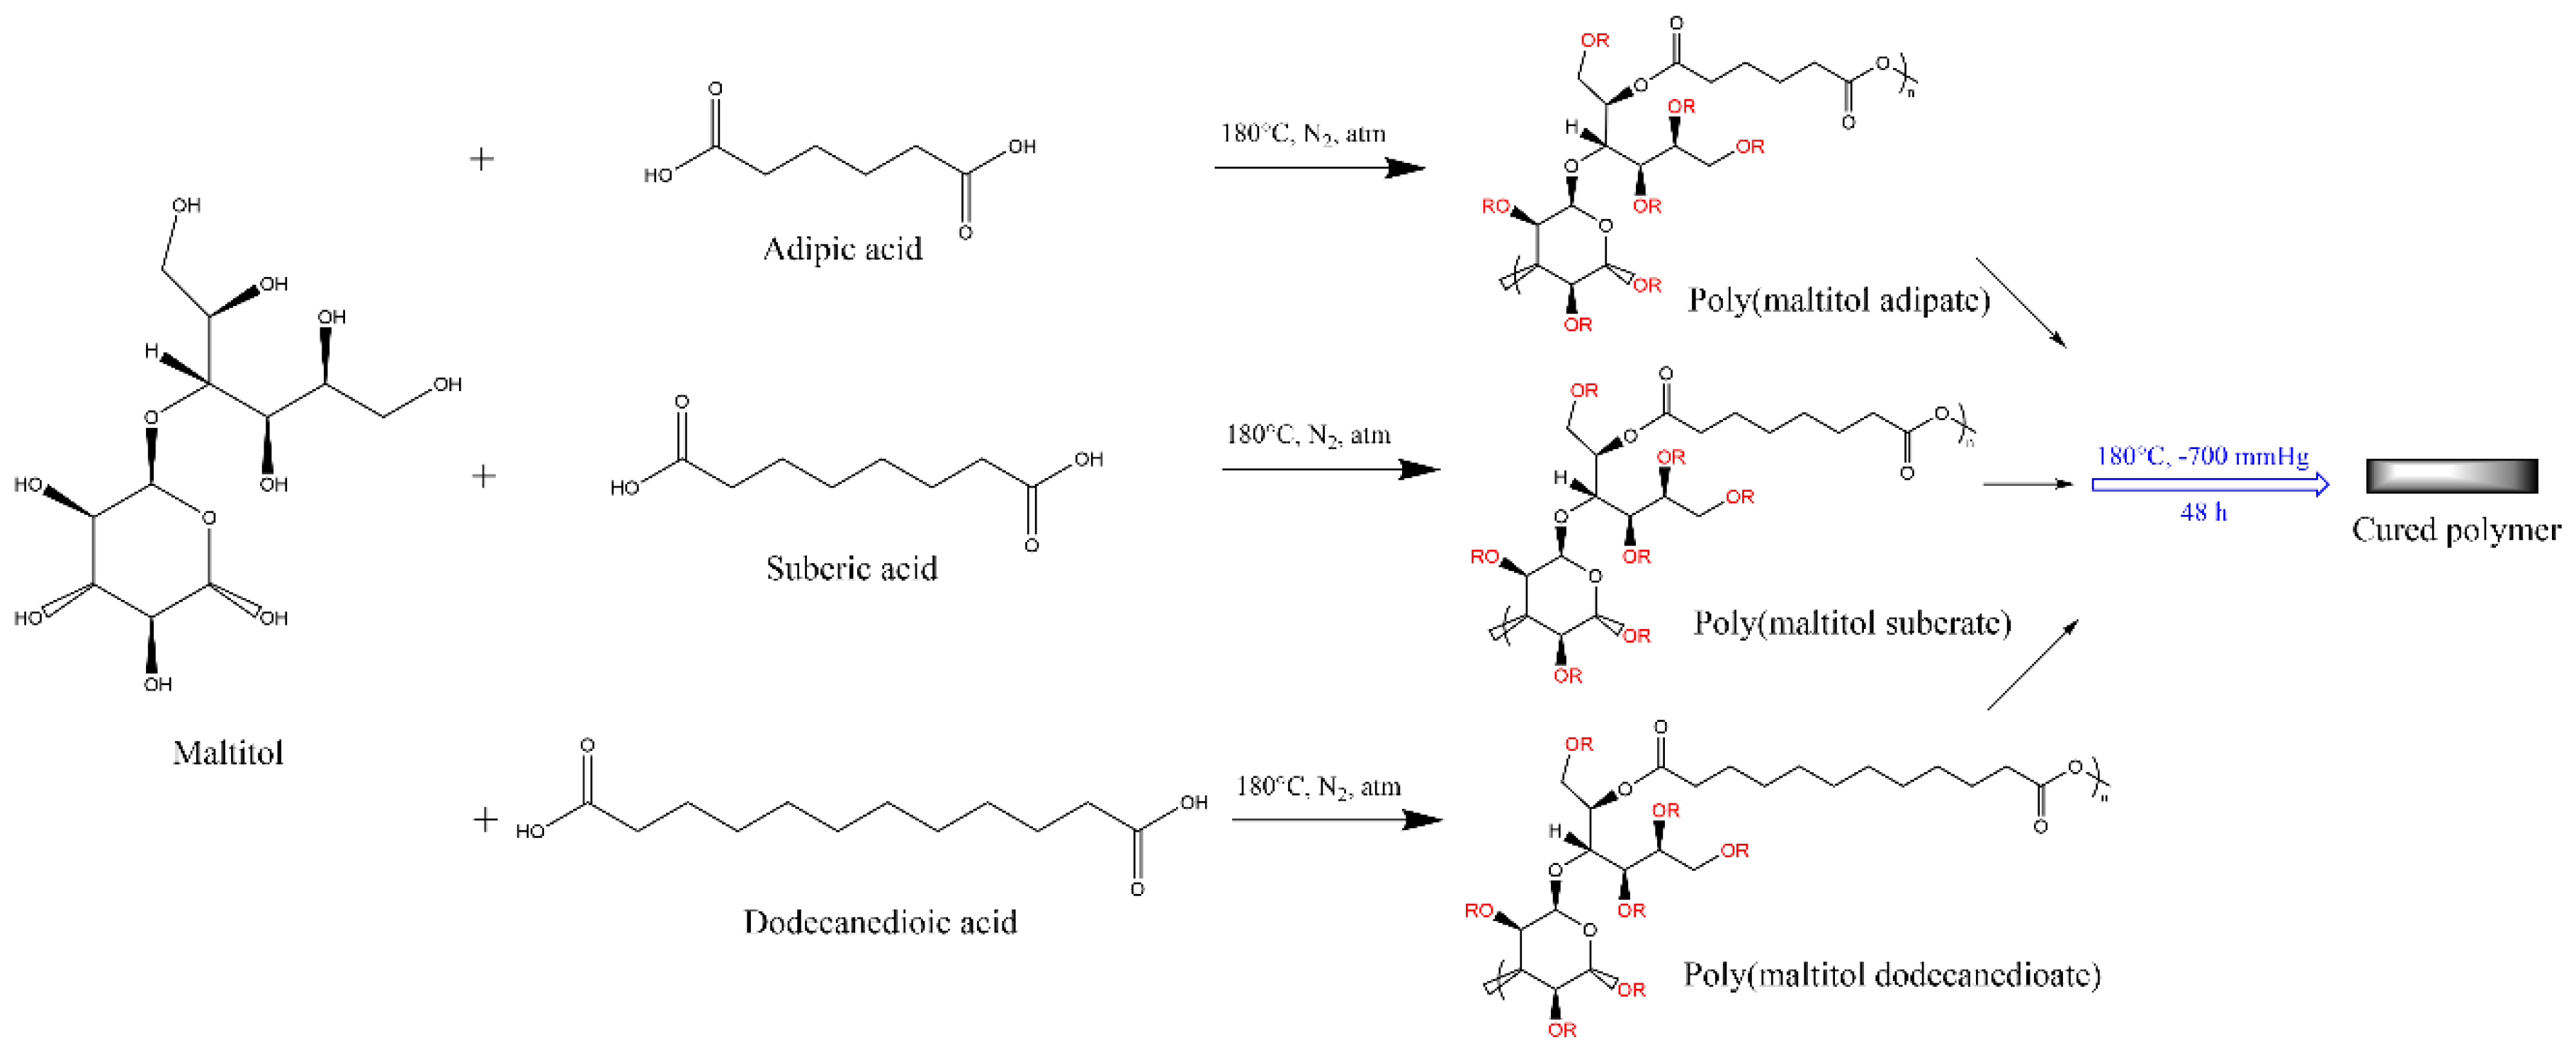 Polymers Free Full Text Review On The Impact Of Polyols On The Properties Of Bio Based Polyesters Html